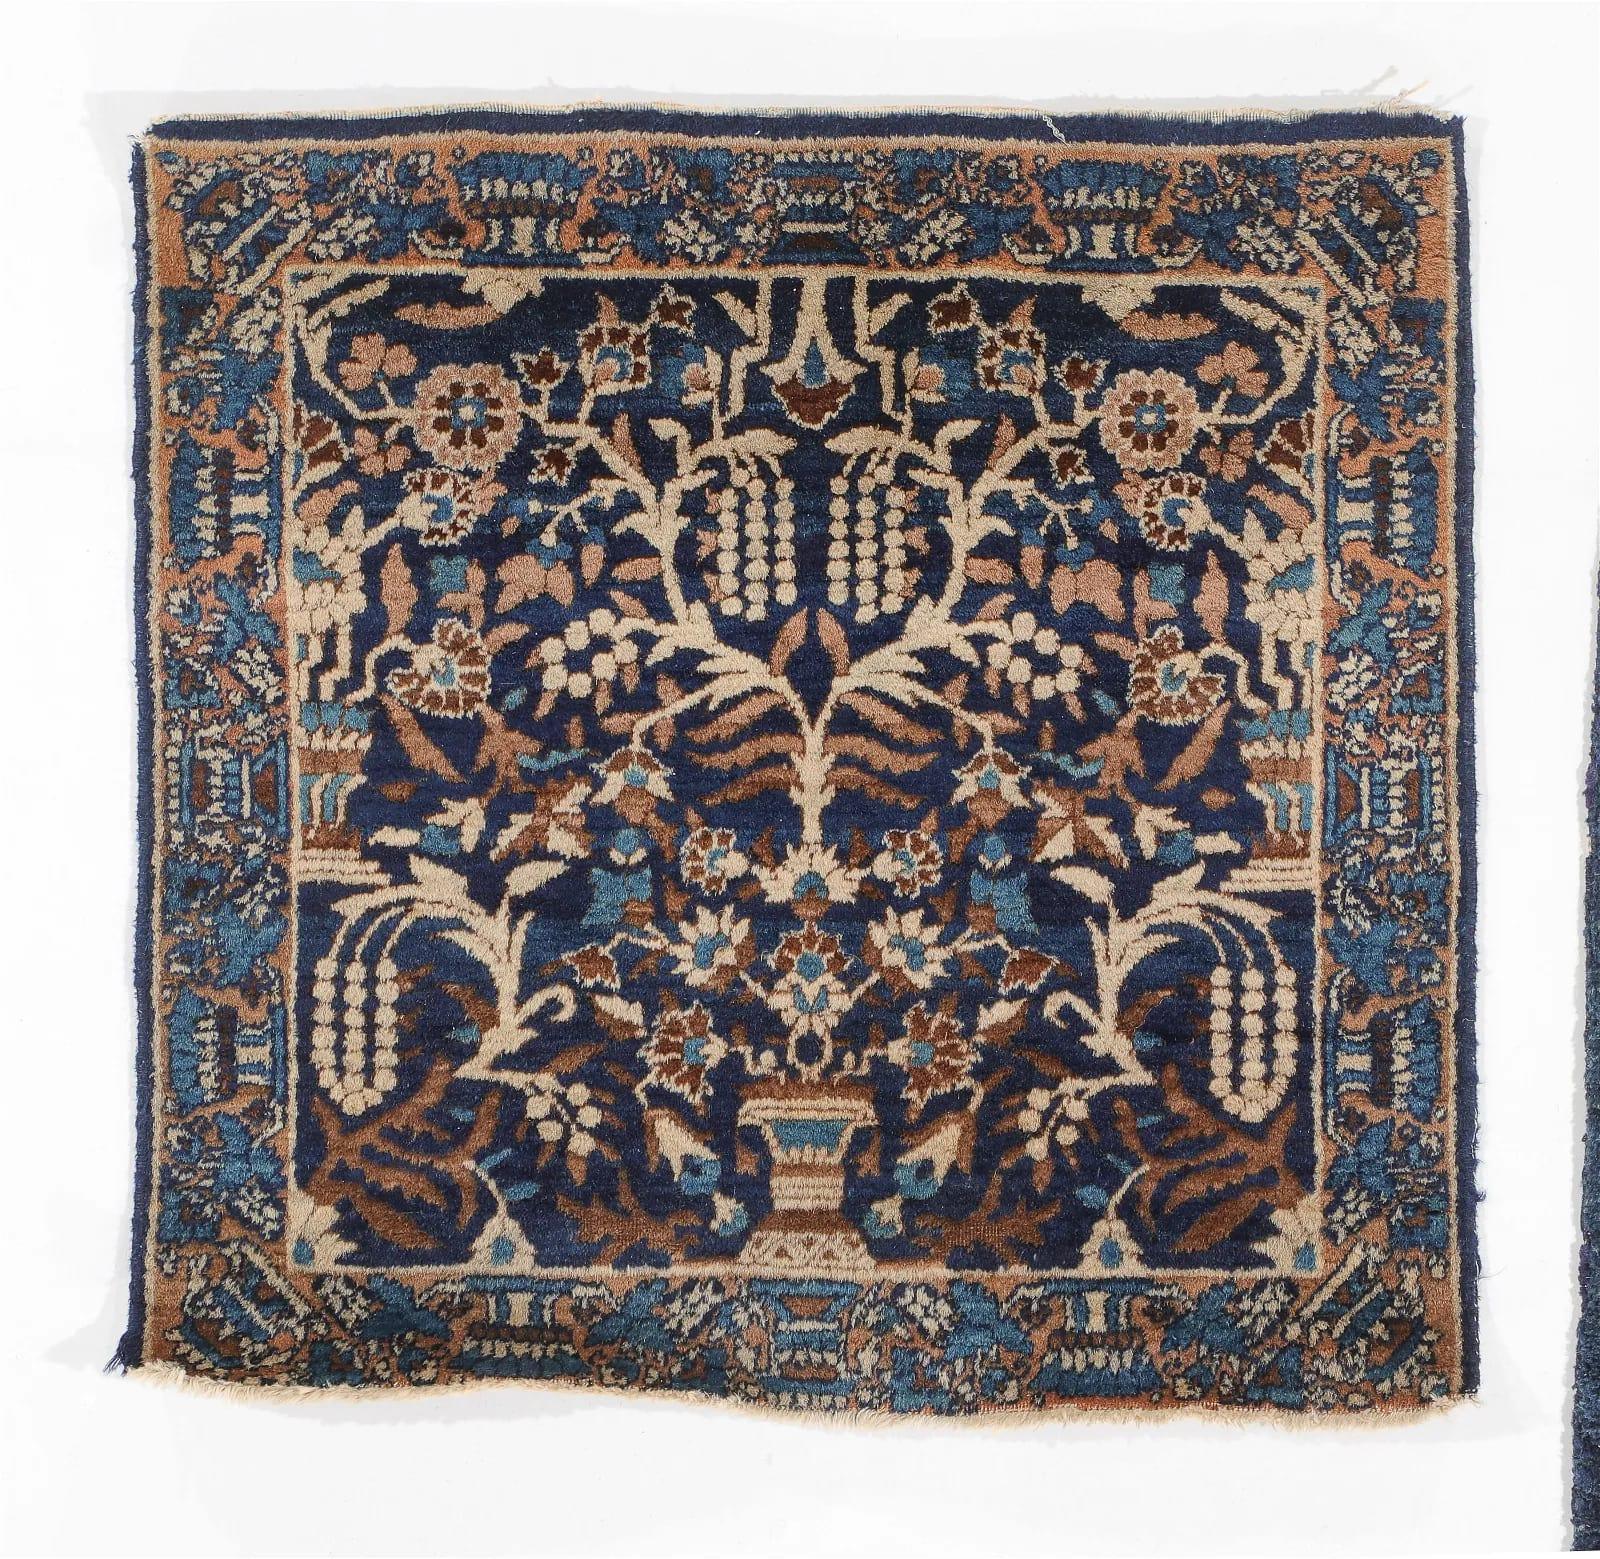 Elevate your space with the timeless charm and exquisite craftsmanship of these two Antique Yazd & Sarouk Small Rugs, originating from Persia. This pair of collectible rugs comprises two distinct pieces, each showcasing the beauty and intricacy of